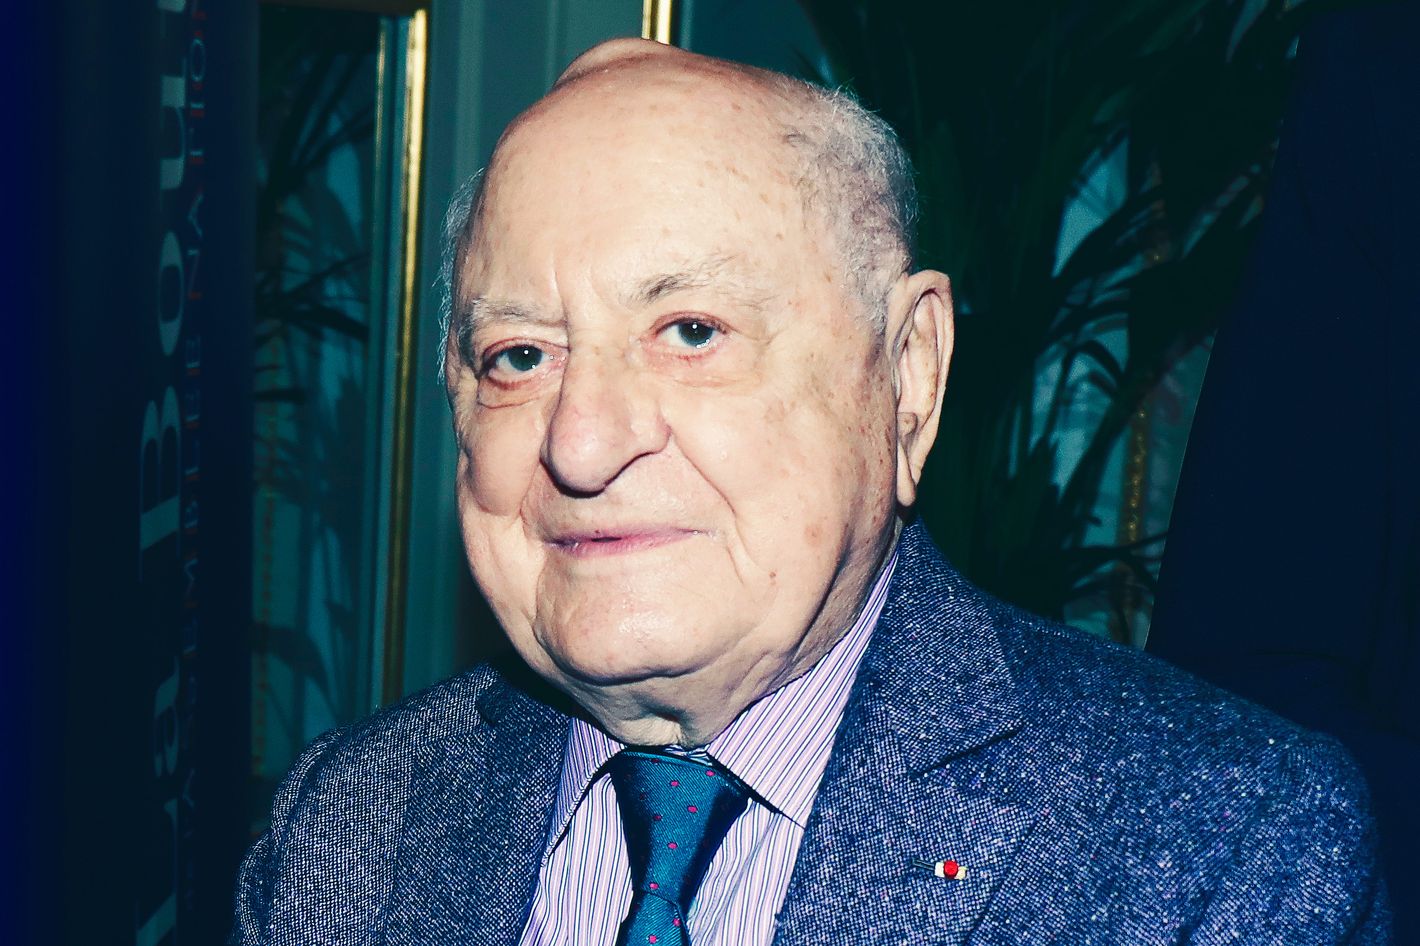 Pierre Berge, fashion house businessman and partner of Yves Saint Laurent